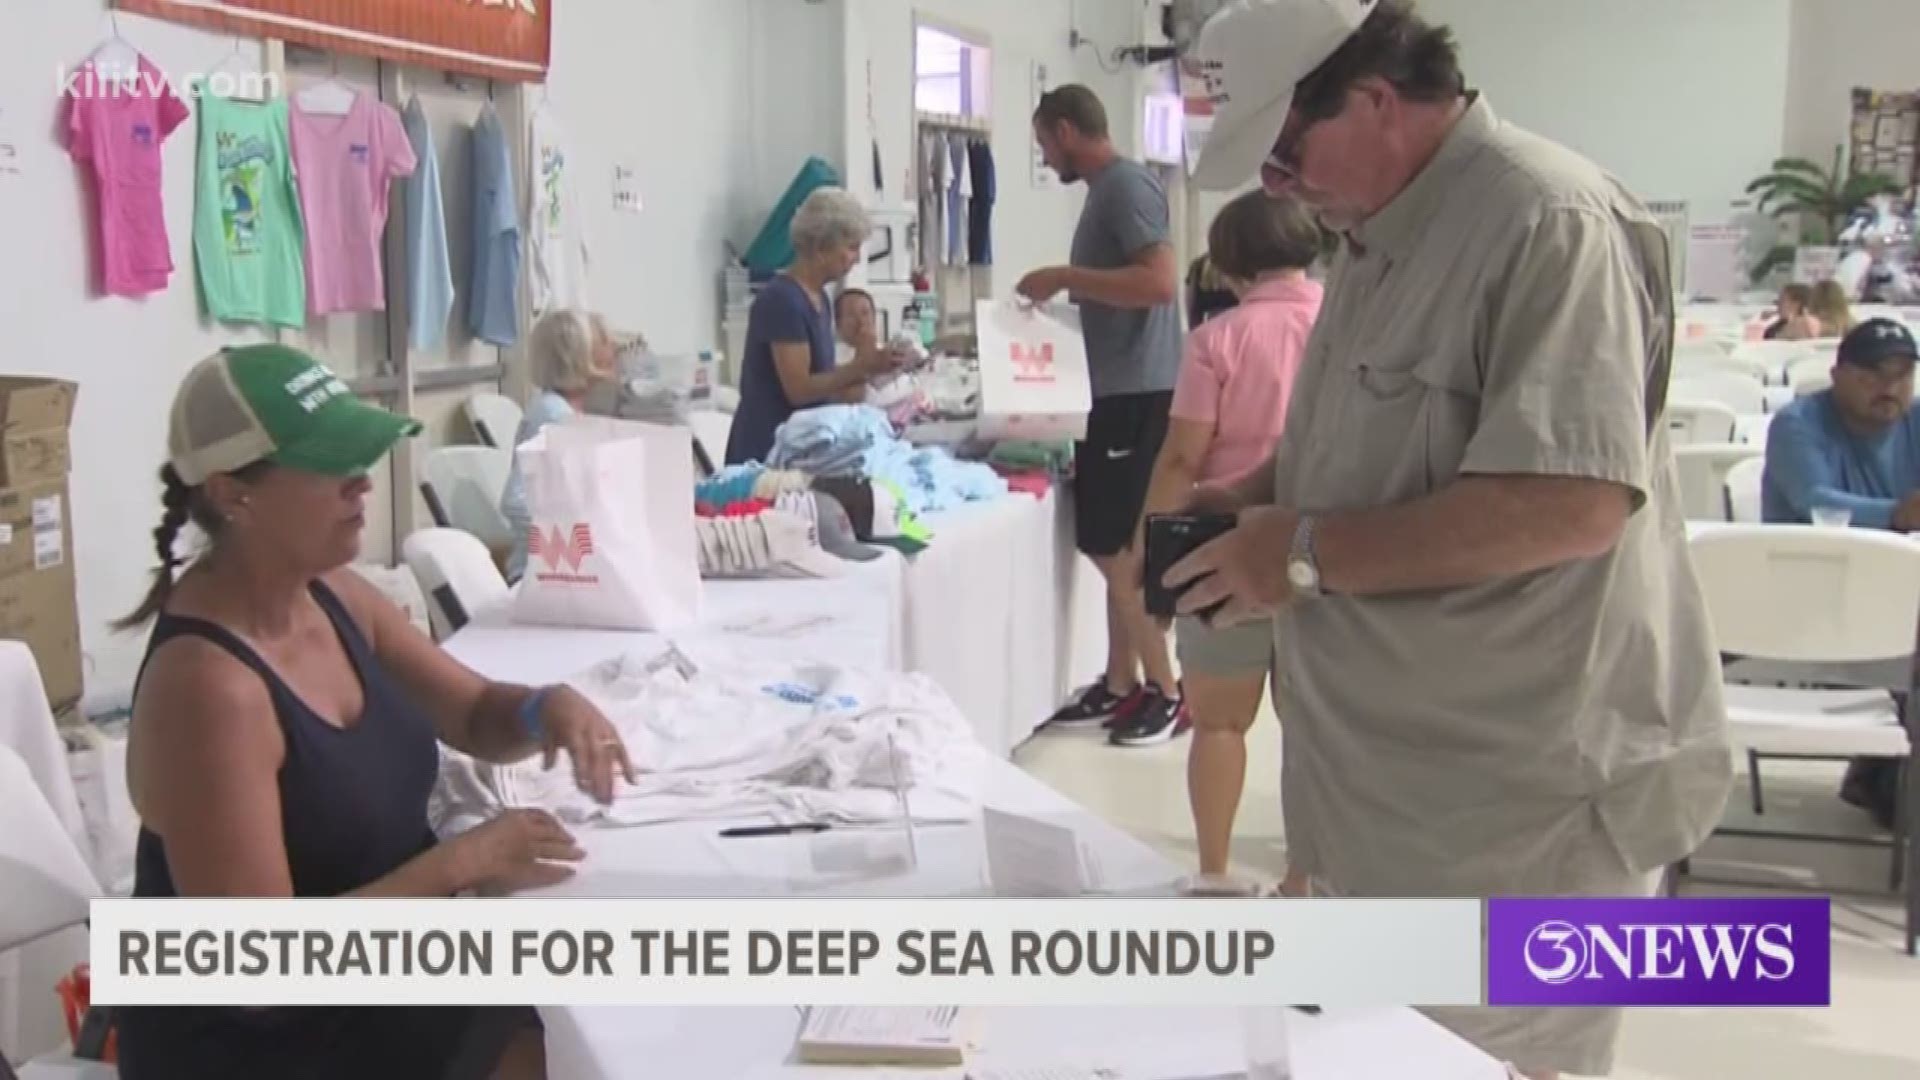 Thursday was registration day for the 84th Deep Sea Roundup! The Texas Gulf Coast's longest running deep sea fishing tournament begins on Friday and will last through the weekend.